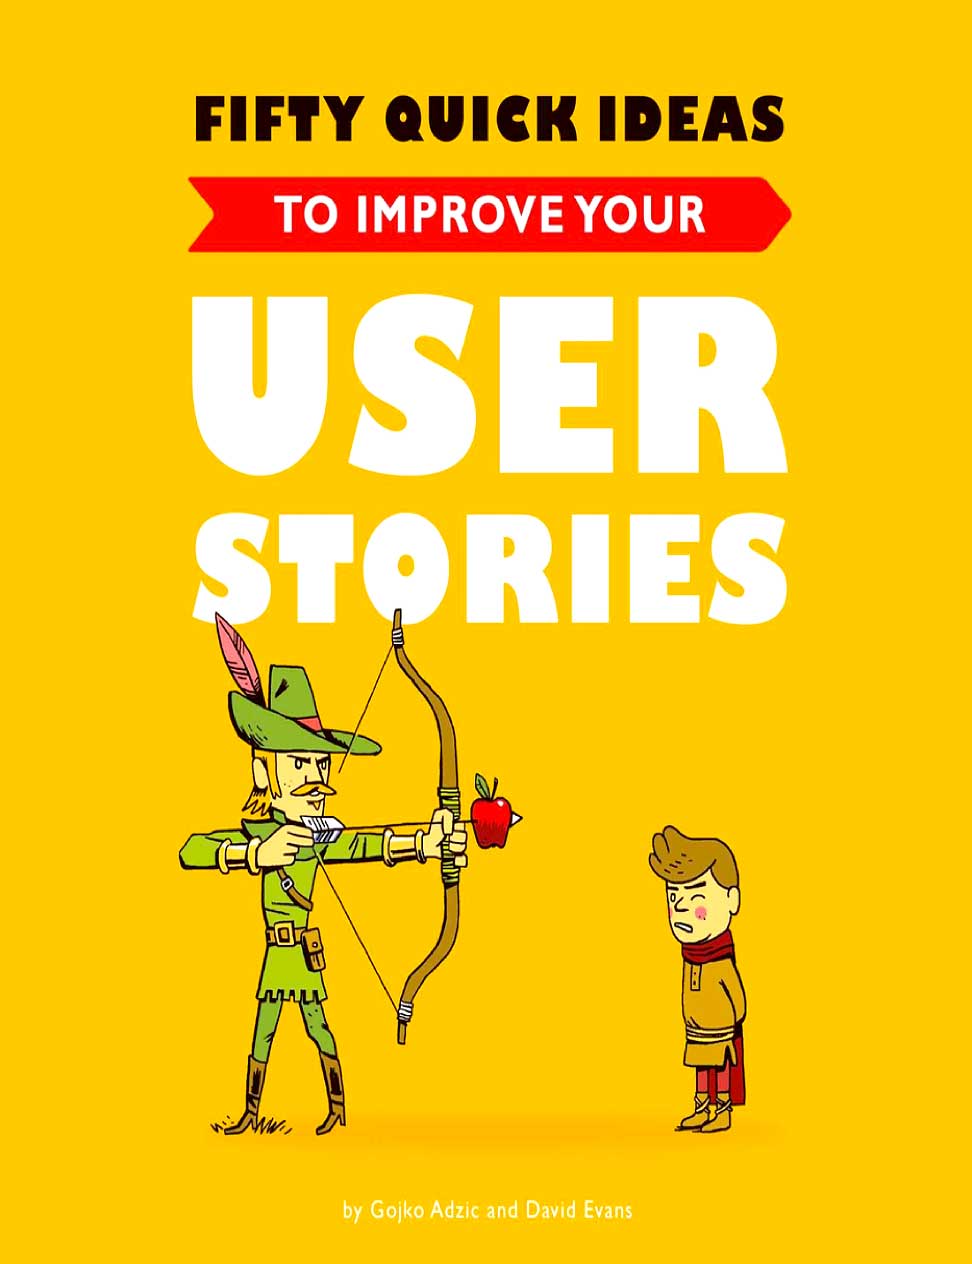 50 quick ideas to improve your user stories PDF